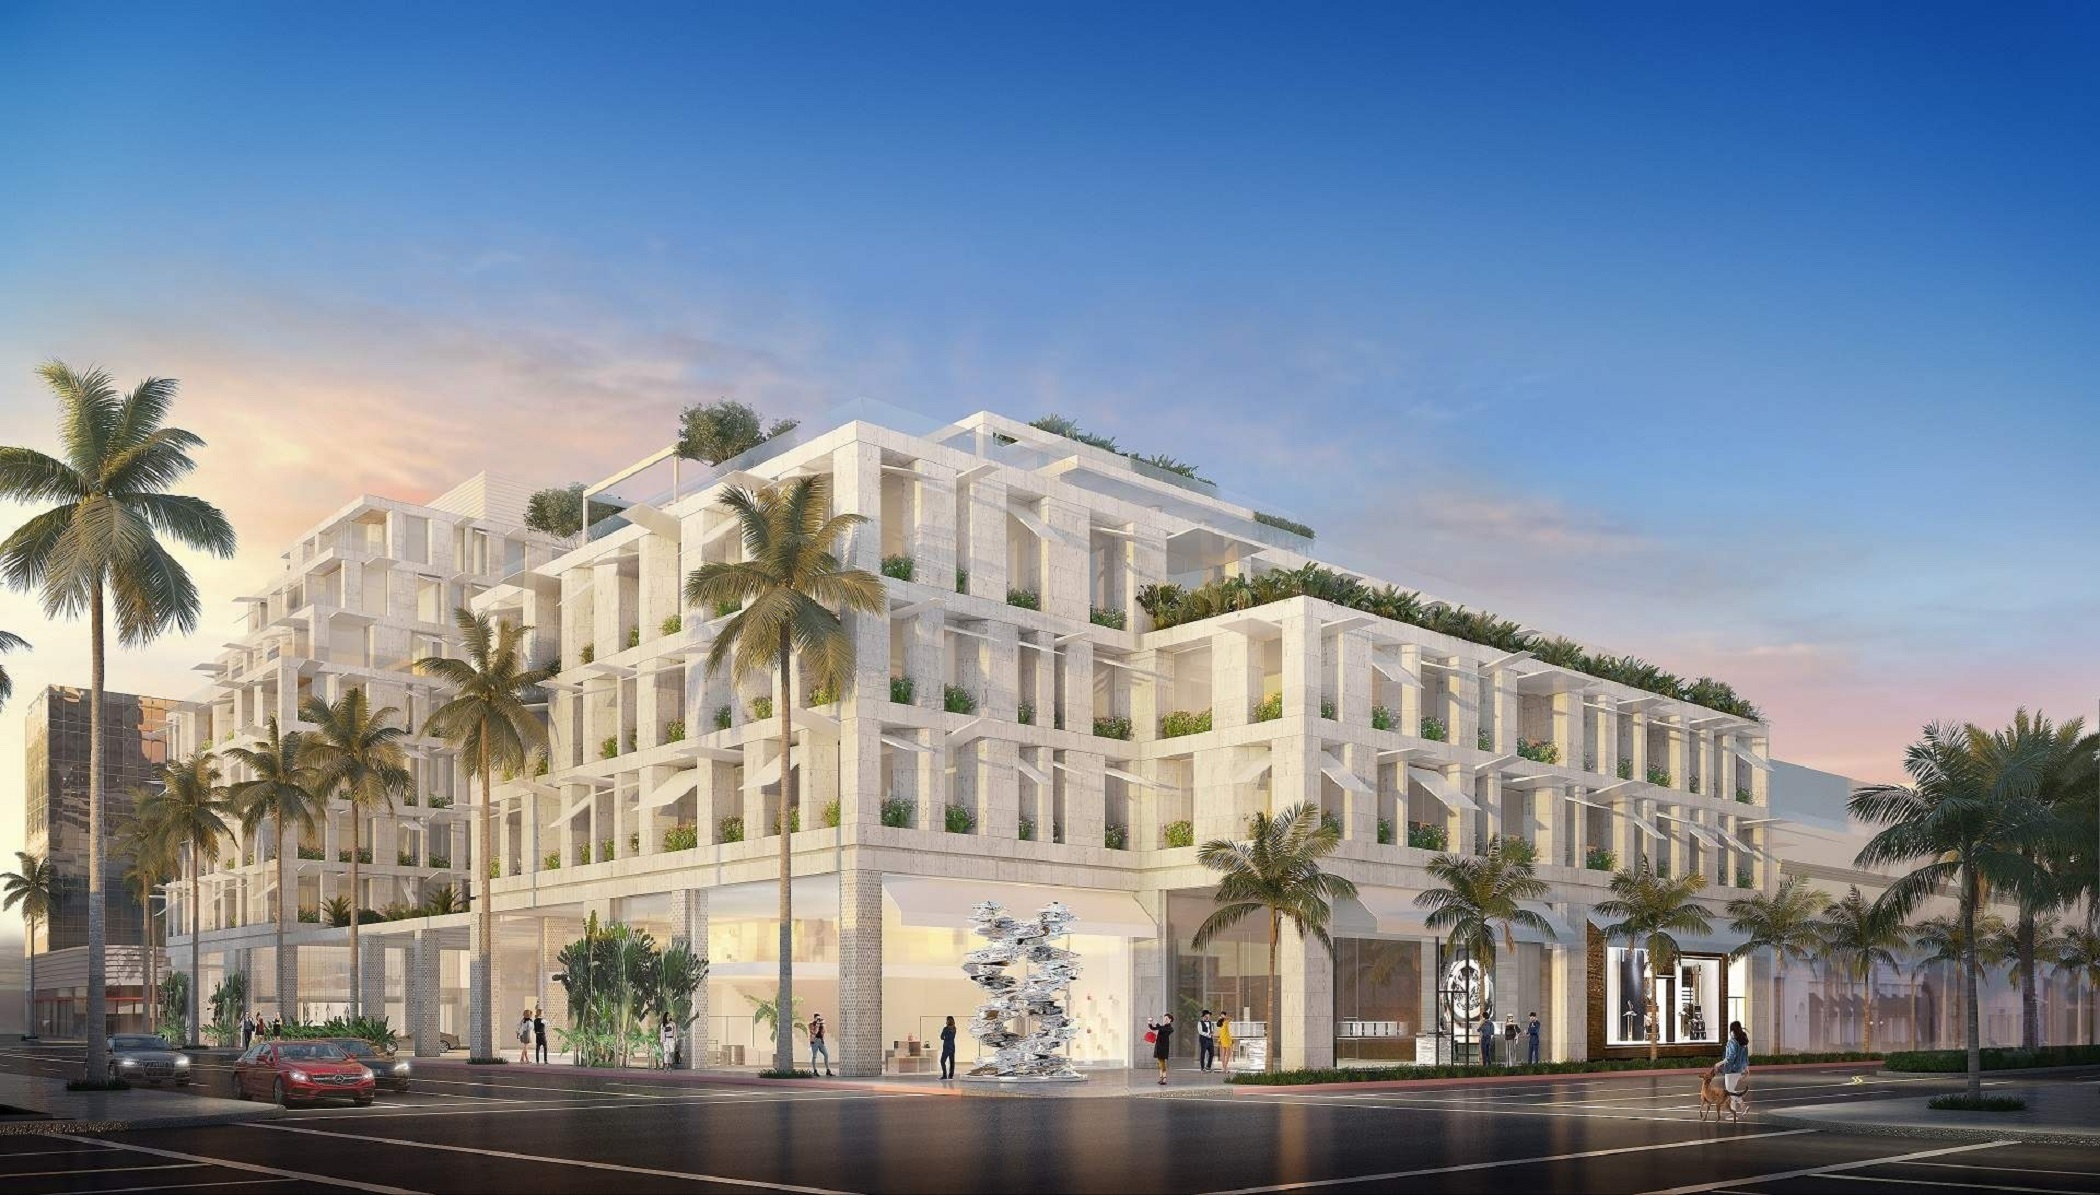 The luxury Cheval Blanc is proposed to rise at 468 N. Rodeo Drive in Beverly Hills, California. (CoStar)